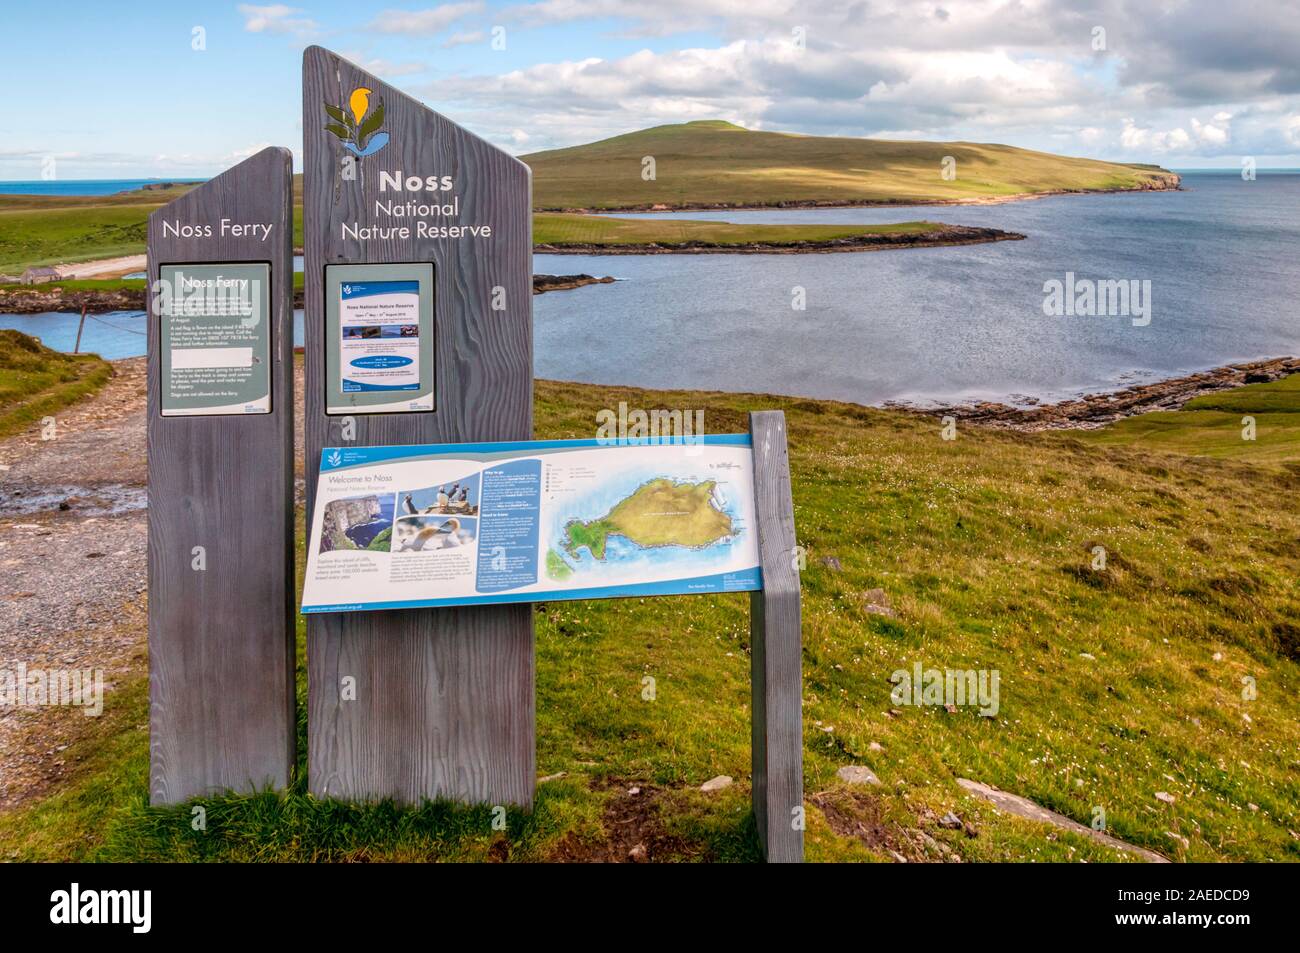 Signs on Bressay for the Noss Ferry and Noss National Nature Reserve, Shetland. Stock Photo